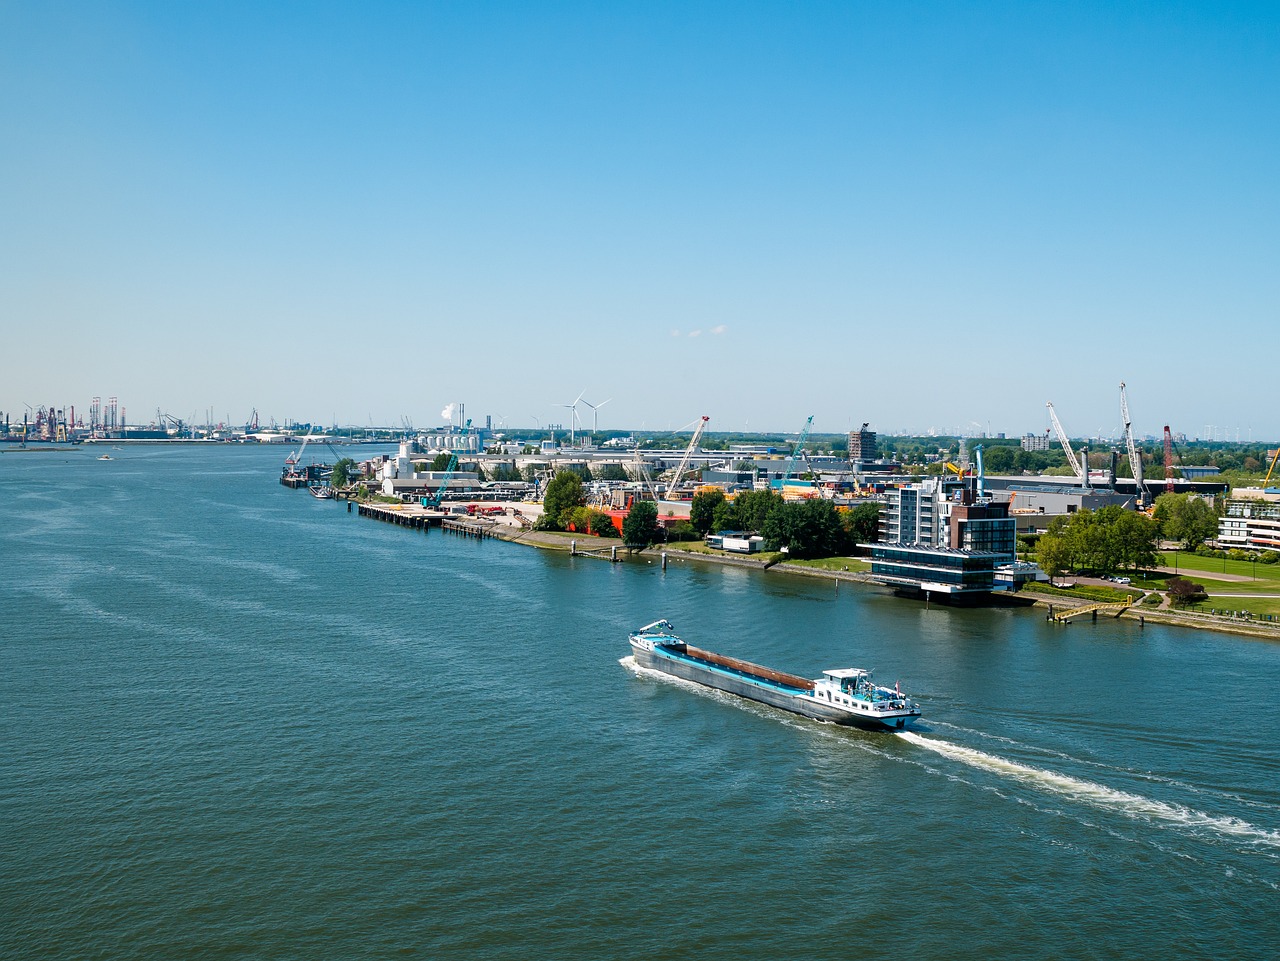 a large boat traveling down a river next to a city, by Michiel van Musscher, shutterstock, shot from 5 0 feet distance, high quality photo, port scene background, wide long view